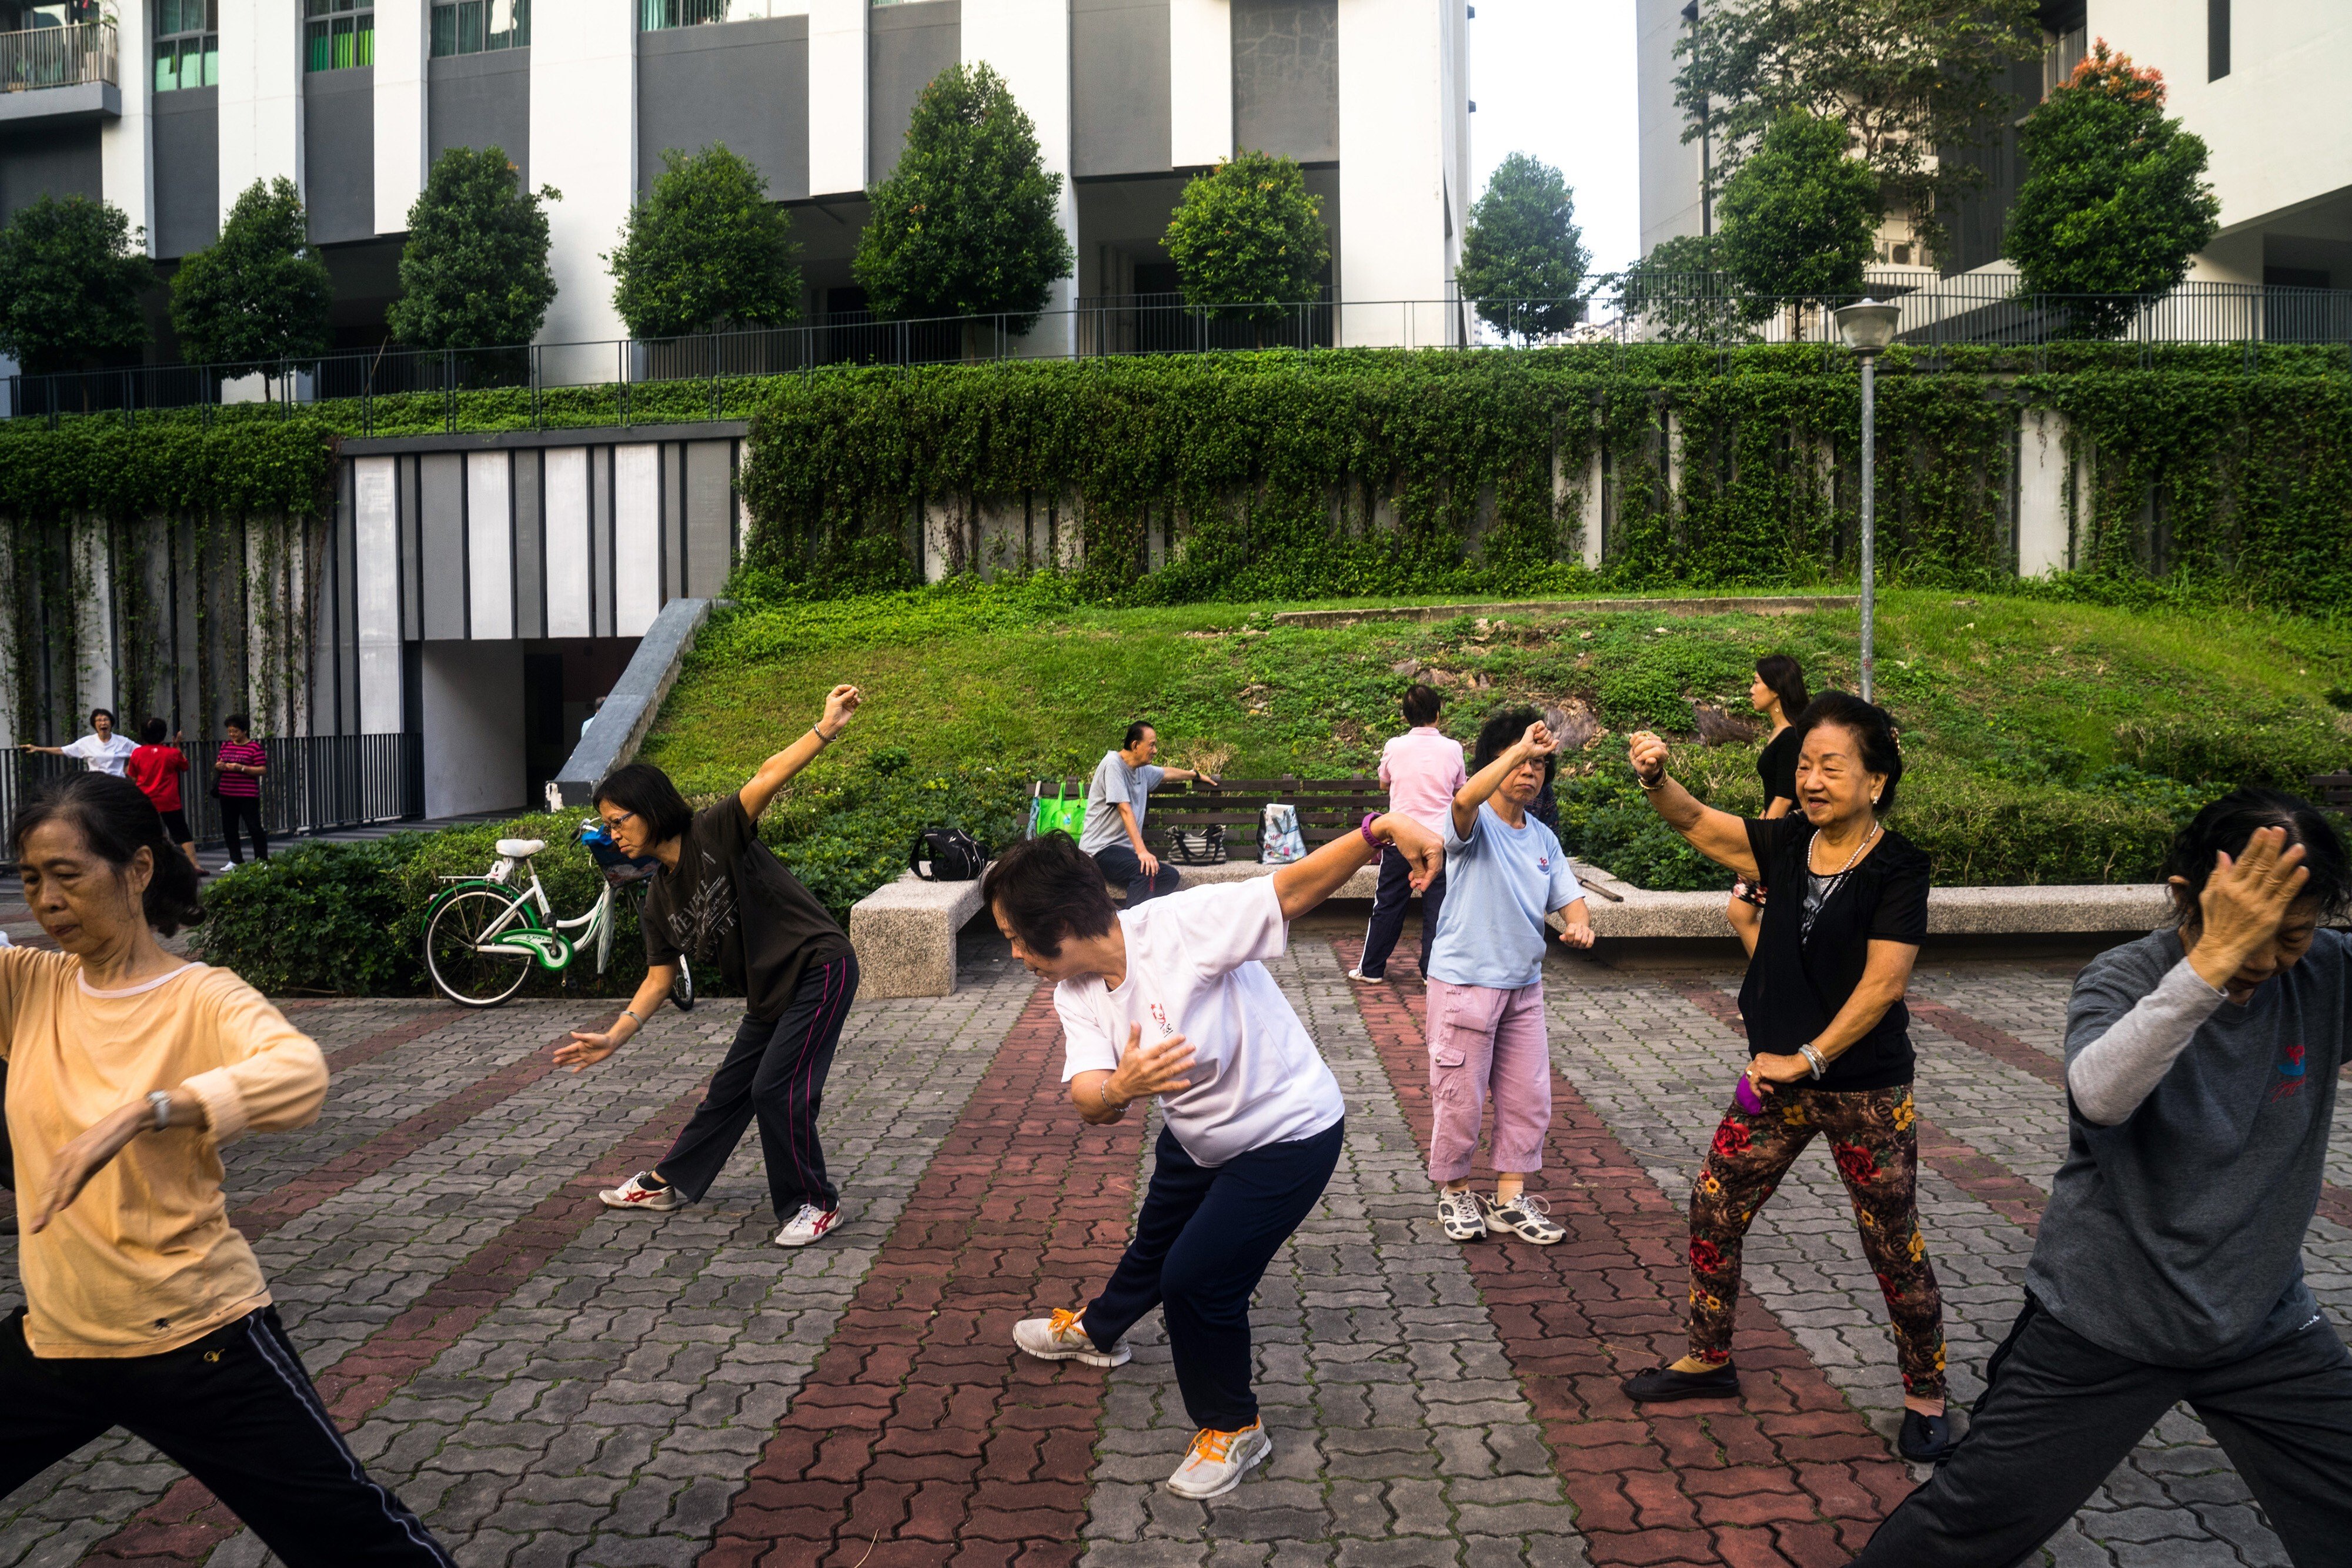 Singaporean residents practise tai chi at a Housing and Development Board (HDB) public housing estate in 2015. Photo: Bloomberg